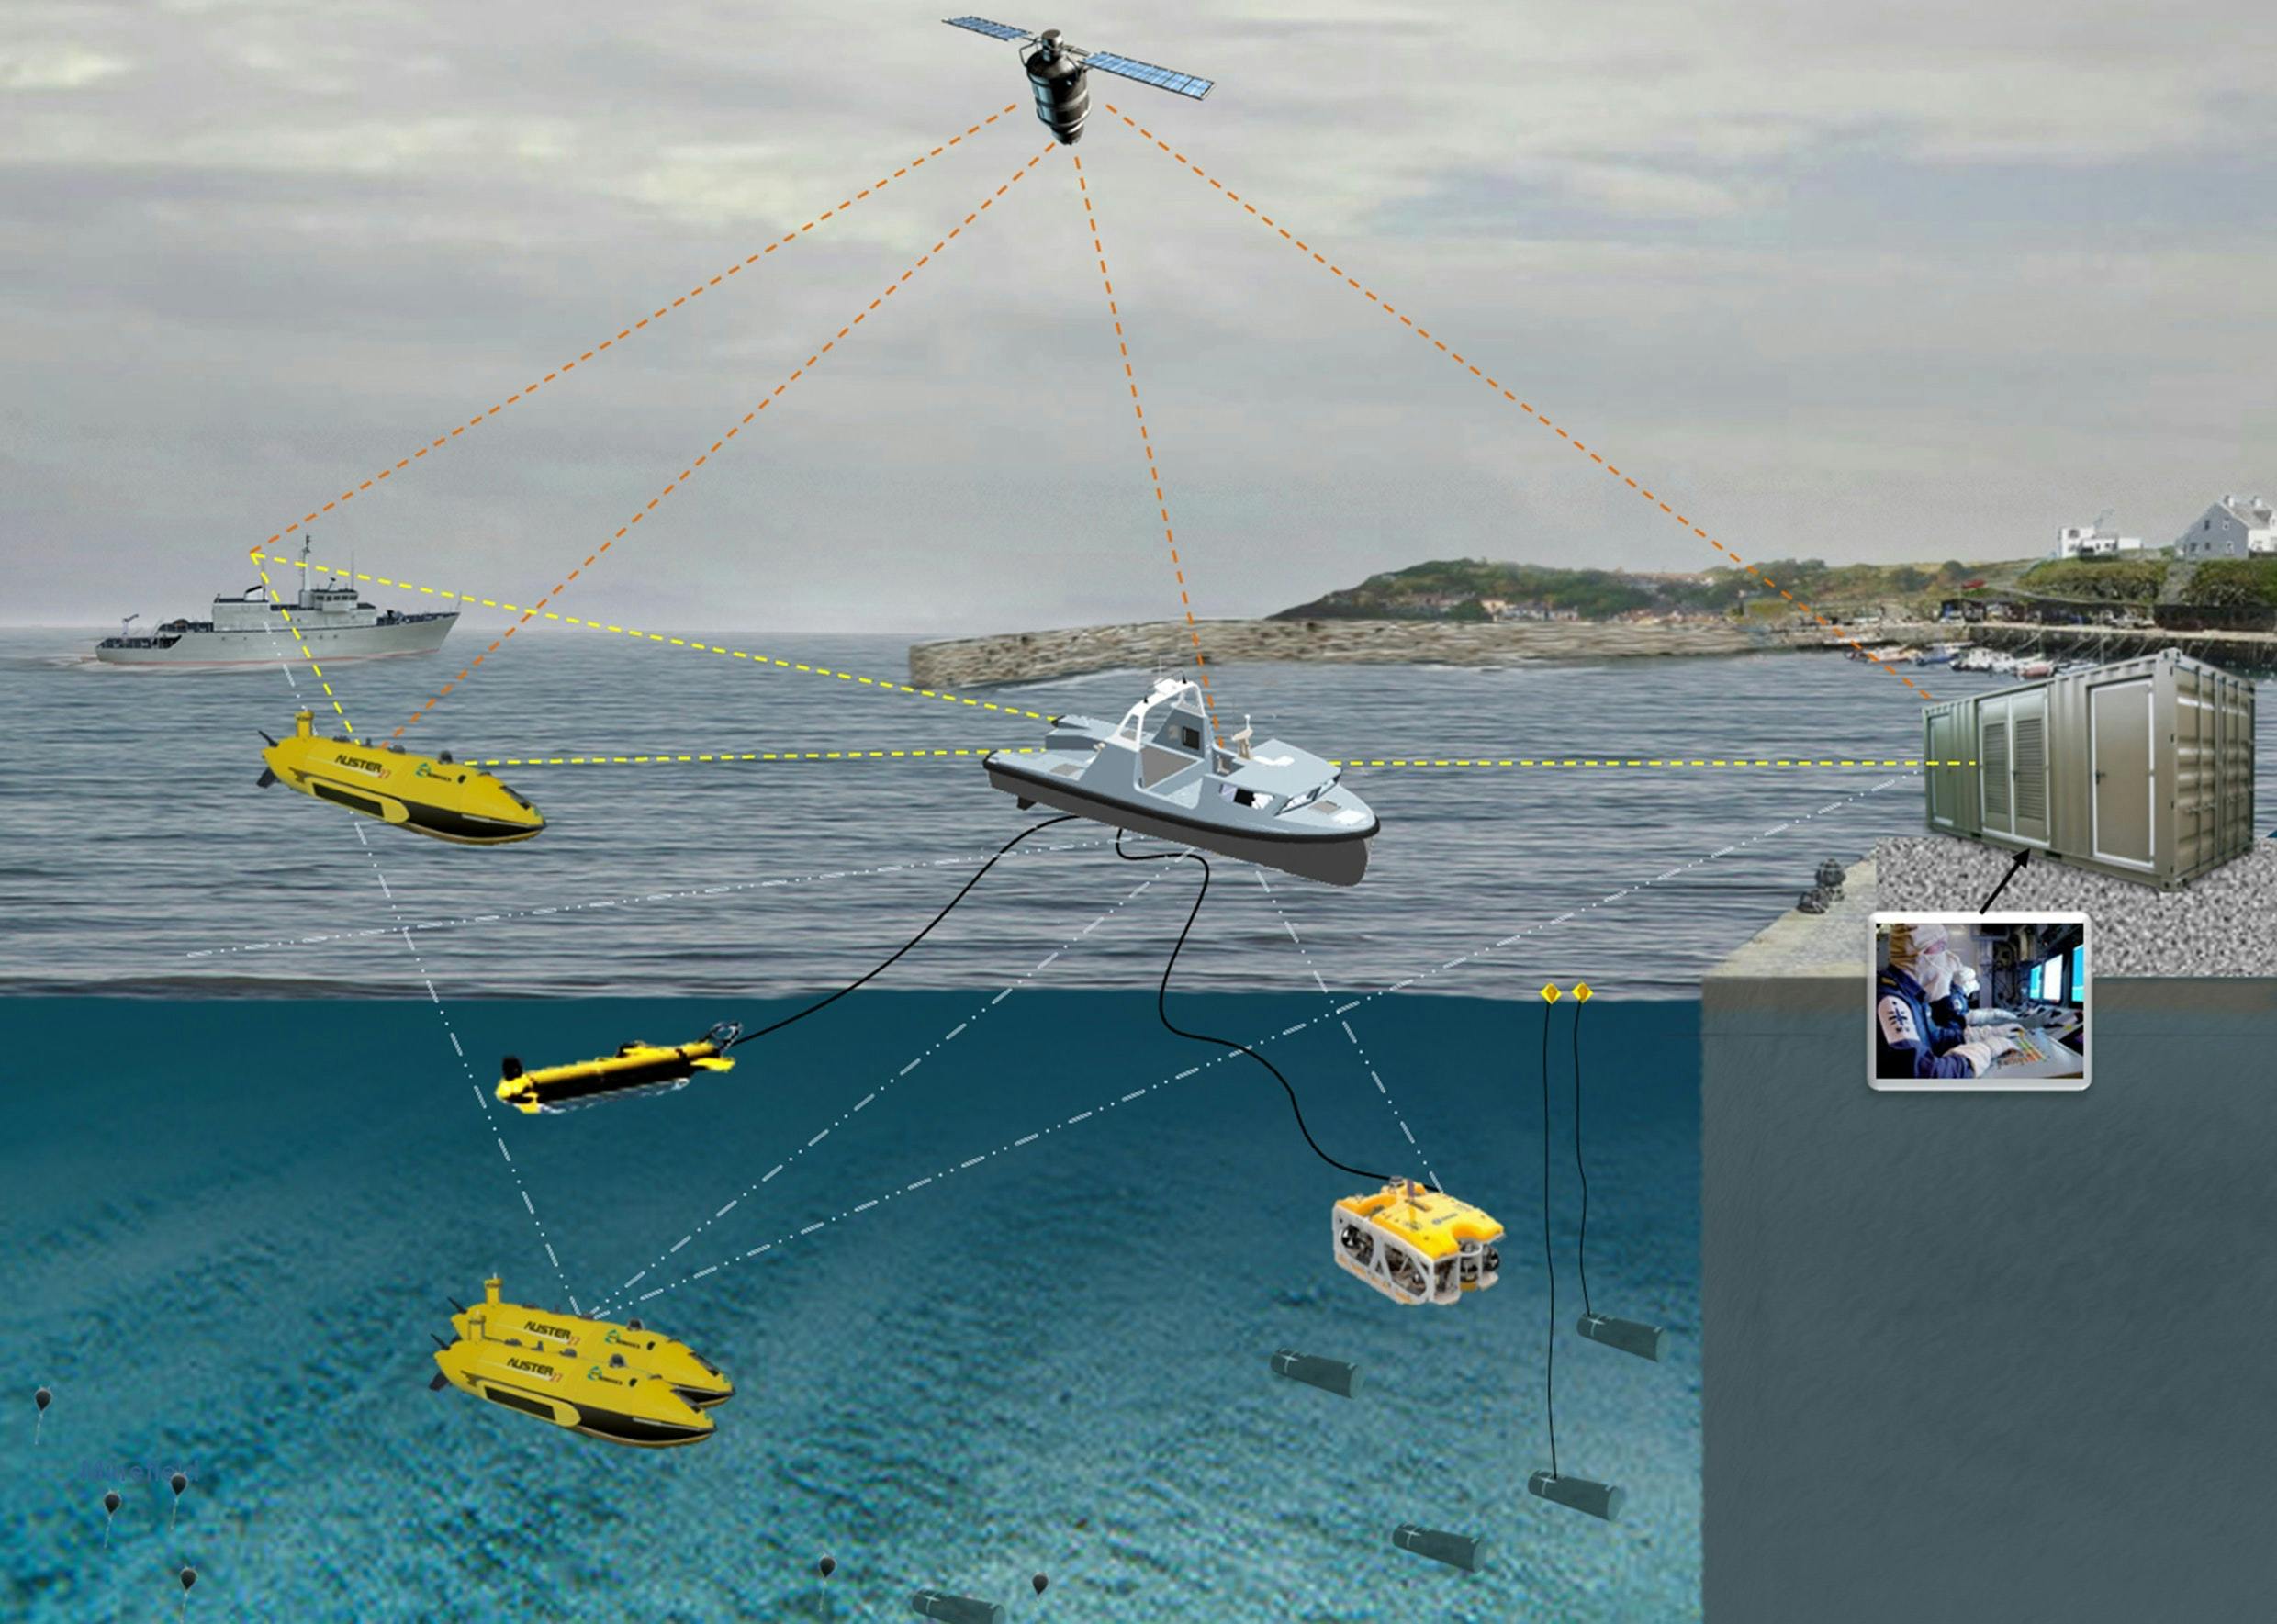 Infographic shows Halcyon, a small Unmanned Surface Vehicle (USV) – just 12 metres long and 3.5 metres wide – and the sonar it tows is Thales’s state-of-the-art Towed Synthetic Aperture Sonar (T-SAS). As part of the MMCM programme, Thales is providing systems to both the French Navy and Royal Navy for two years of evaluation testing. Each system will comprise a USV (Unmanned Surface Vehicle) equipped with an autonomous navigation system, an obstacle detection and avoidance sonar, a threat identification and neutralisation capability based on ROVs (Remotely Operated Vehicles), a T-SAS (Towed Synthetic Aperture Sonar) and AUVs (Autonomous Underwater Vehicles). The geolocated AUVs will use the latest-generation synthetic aperture sonar SAMDIS with multi-aspect functionality for improved classification. They will perform their tasks autonomously with control from a host ship or shore-based station via high-data-rate communication links. The systems, meeting the operational requirements of both nations, incorporate state-of-the-art technologies including very high-resolution multiview imaging sonars and sophisticated analysis tools to provide unparalleled levels of performance in automatic threat recognition and classification. Copyright Thales 2016.